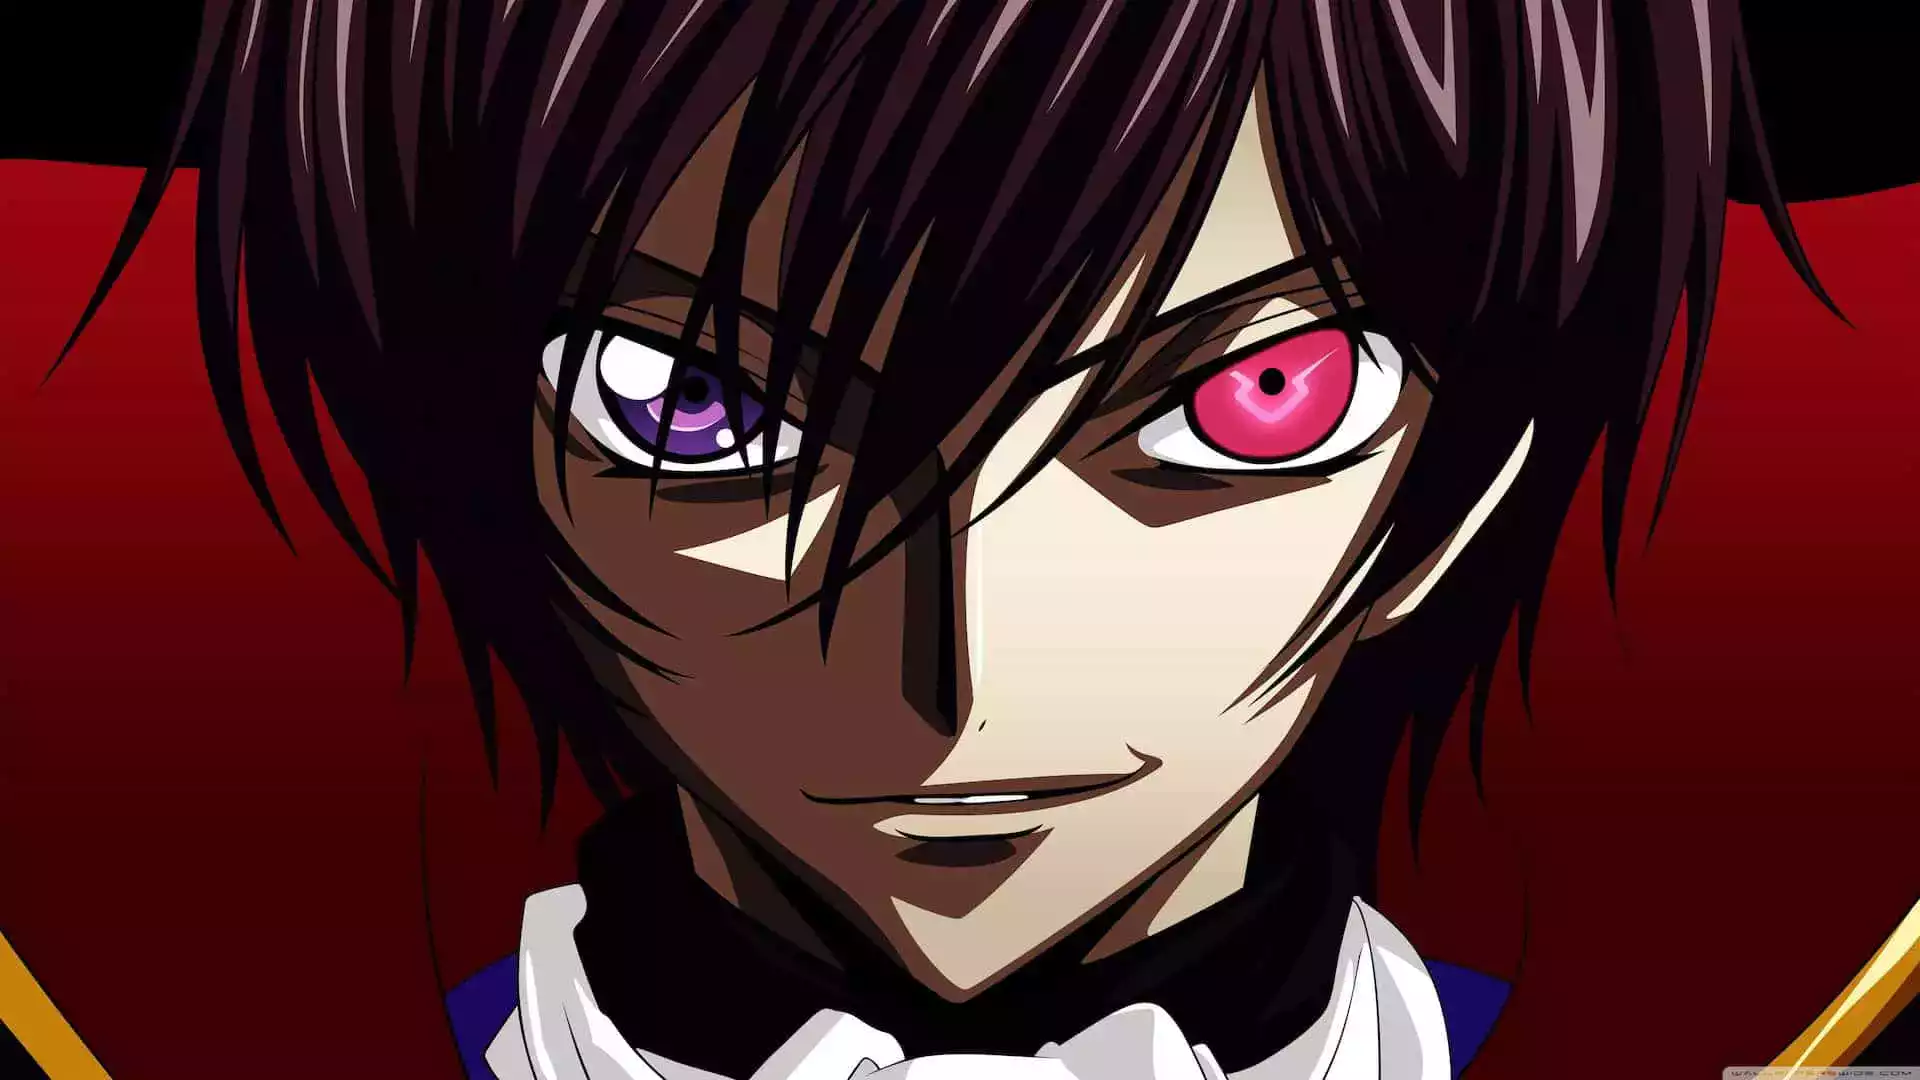 Why Lelouch Is the Most Popular Anime Character-demhanvico.com.vn